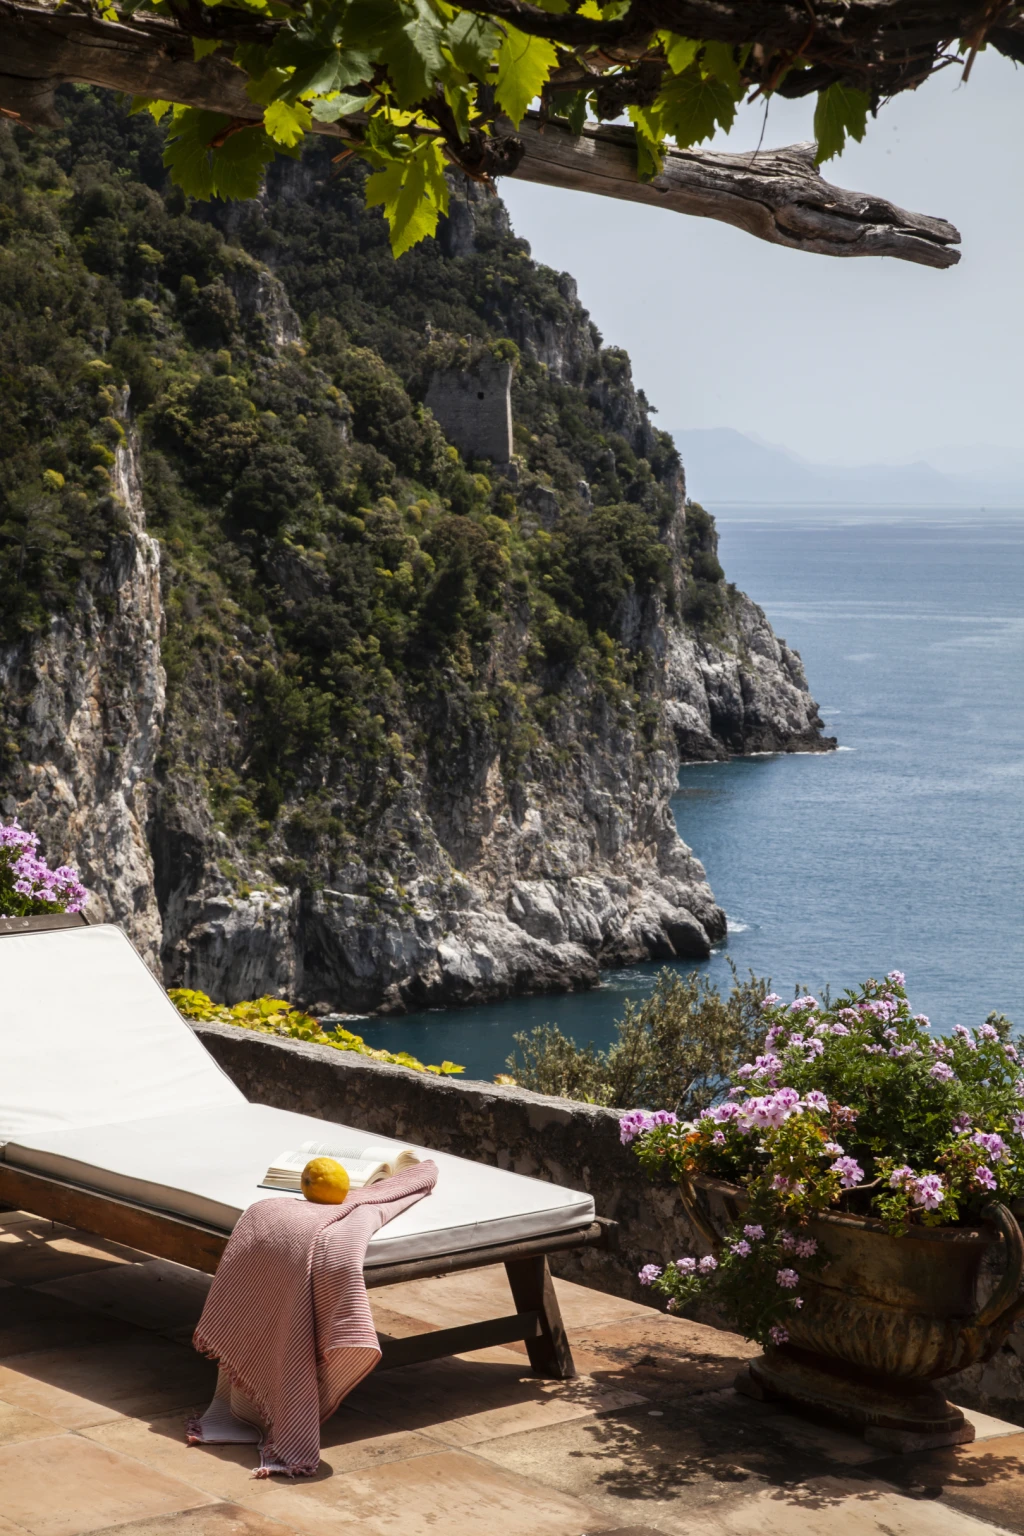 Relax and Recharge in the most beautiful location on the Amalfi Coast